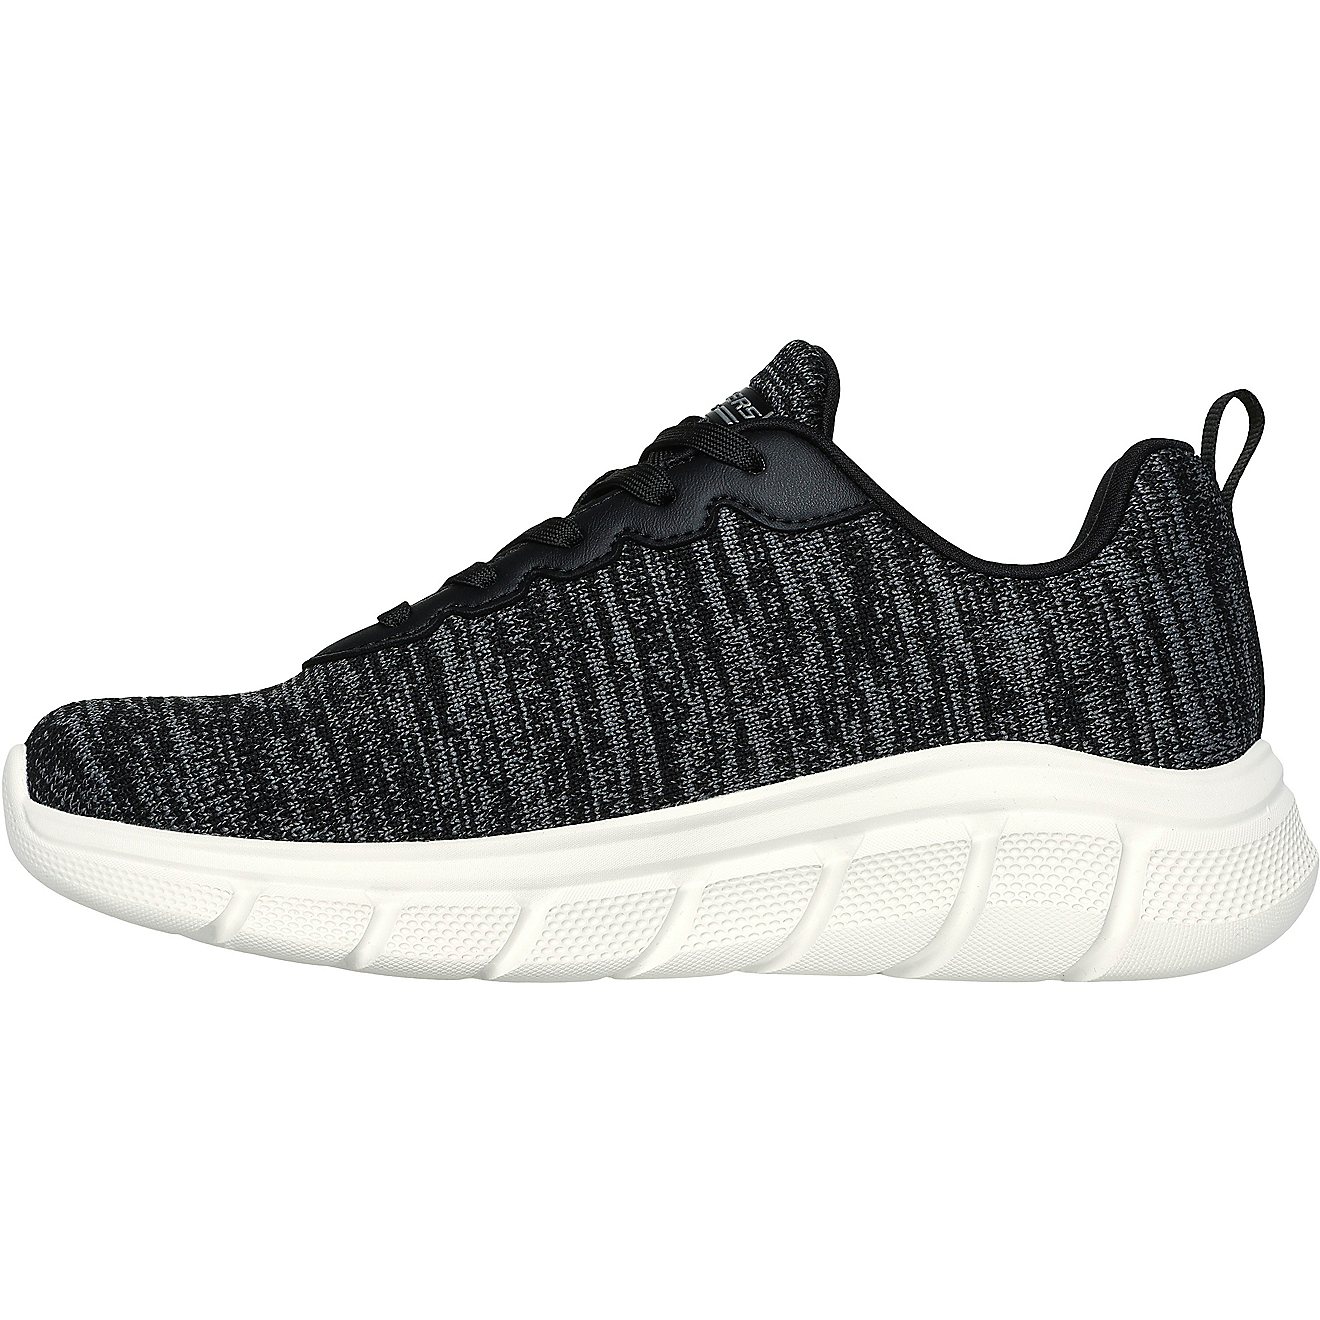 SKECHERS Women's Bobs B Flex Shoes | Free Shipping at Academy